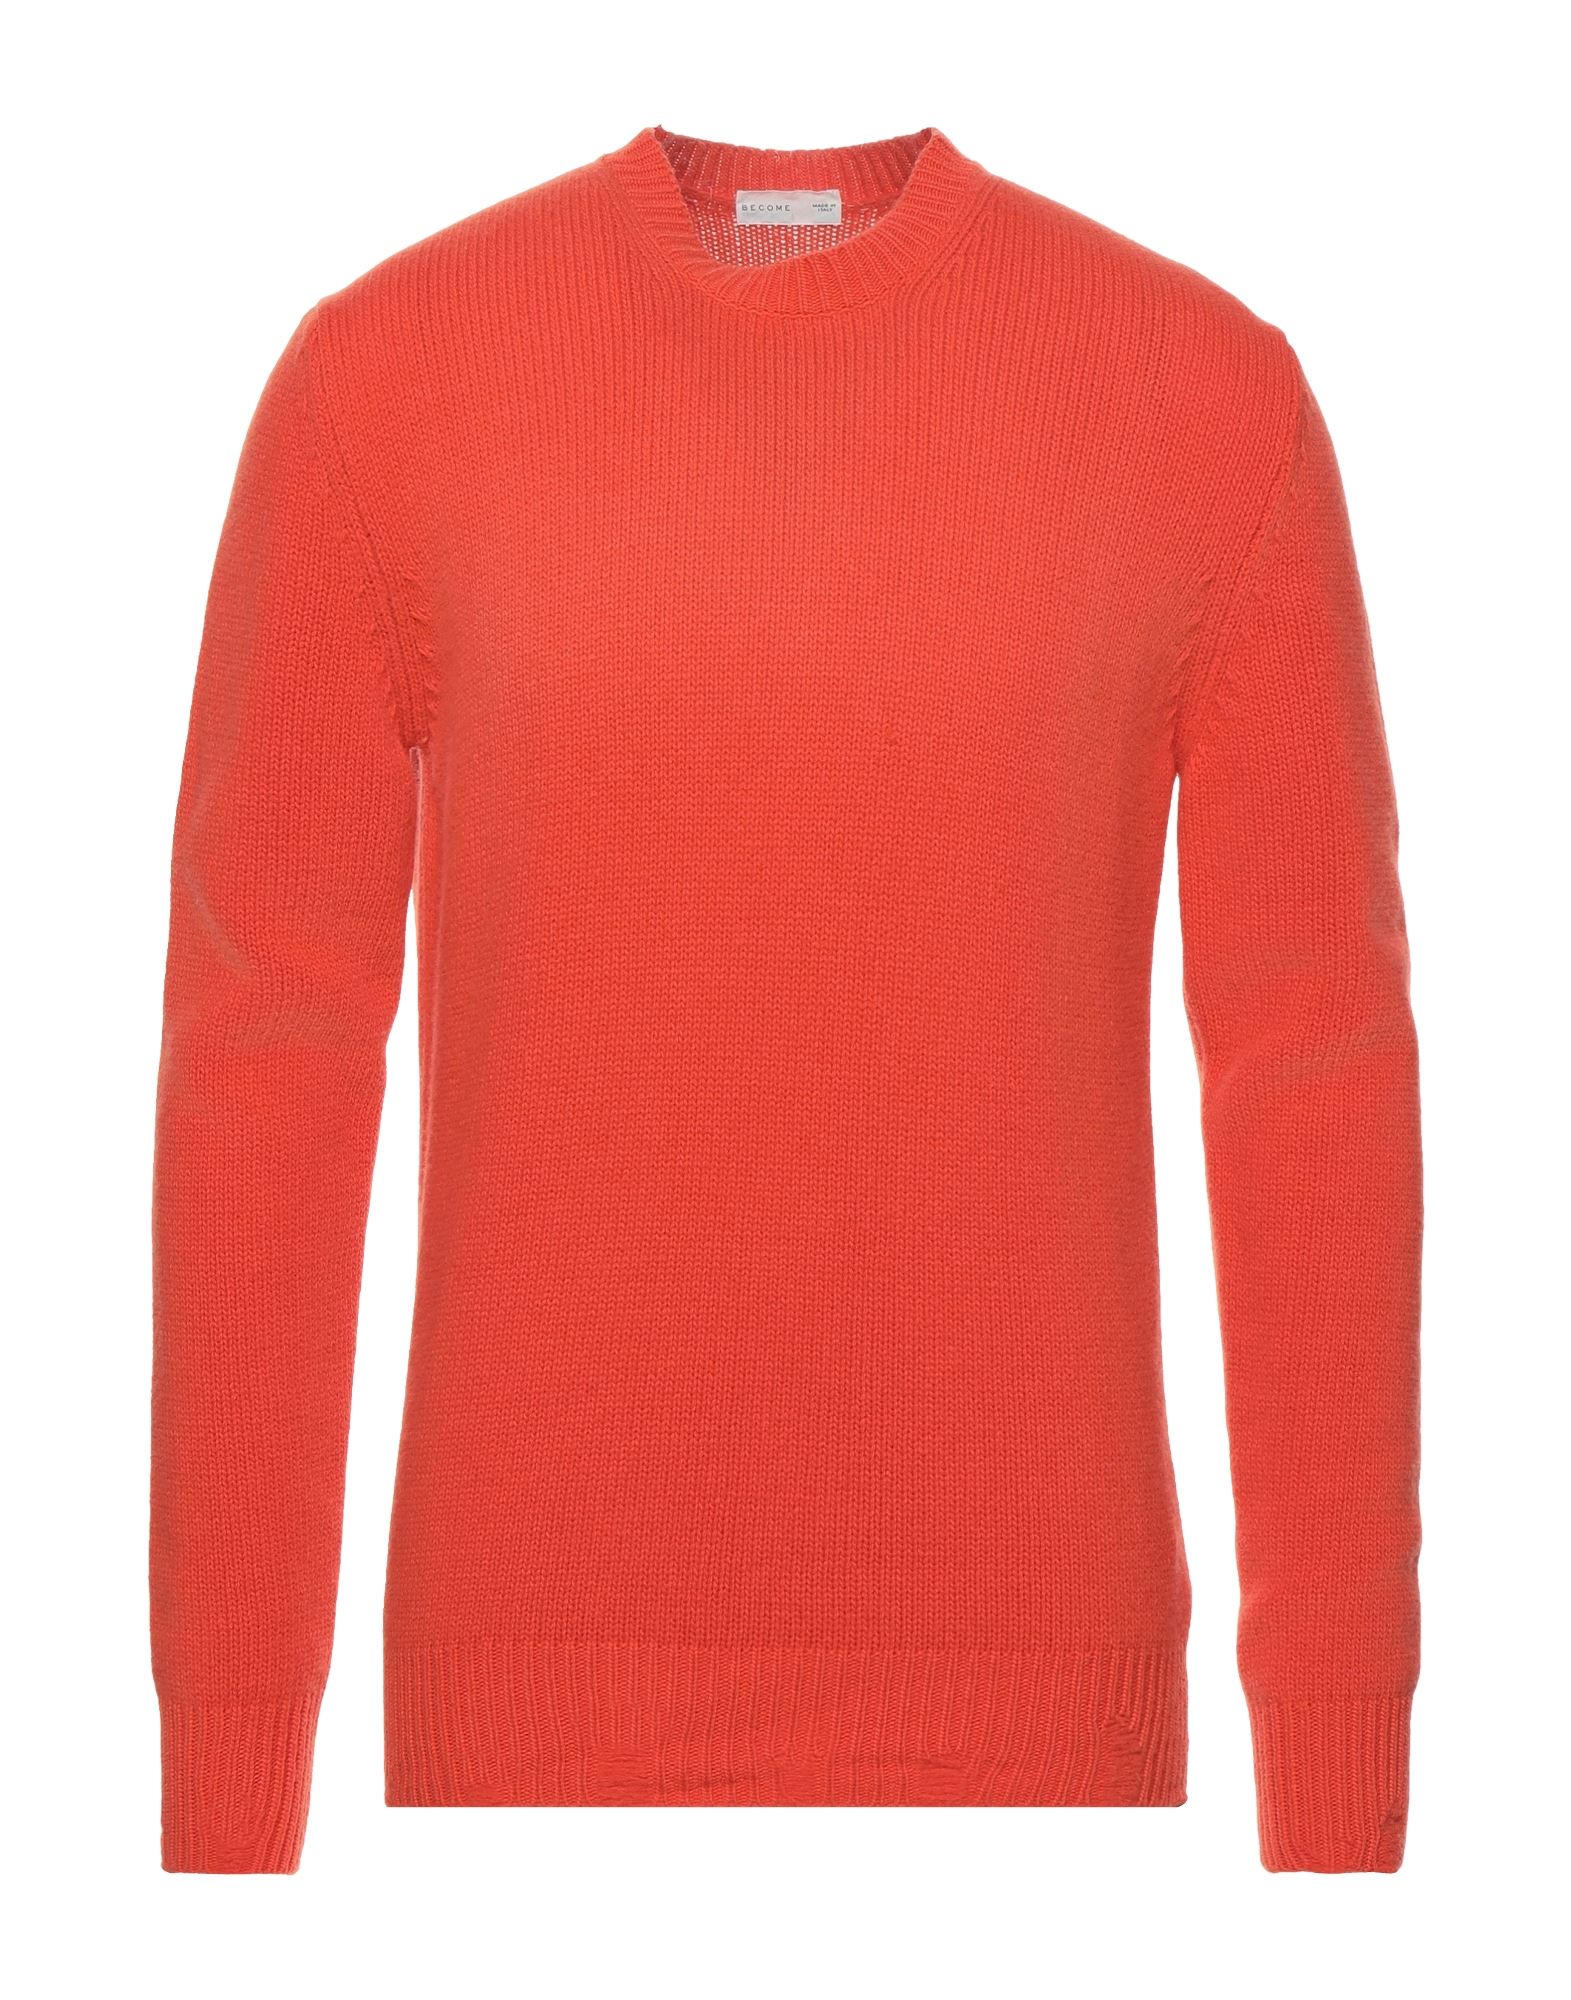 BECOME BECOME MAN SWEATER ORANGE SIZE 42 VIRGIN WOOL